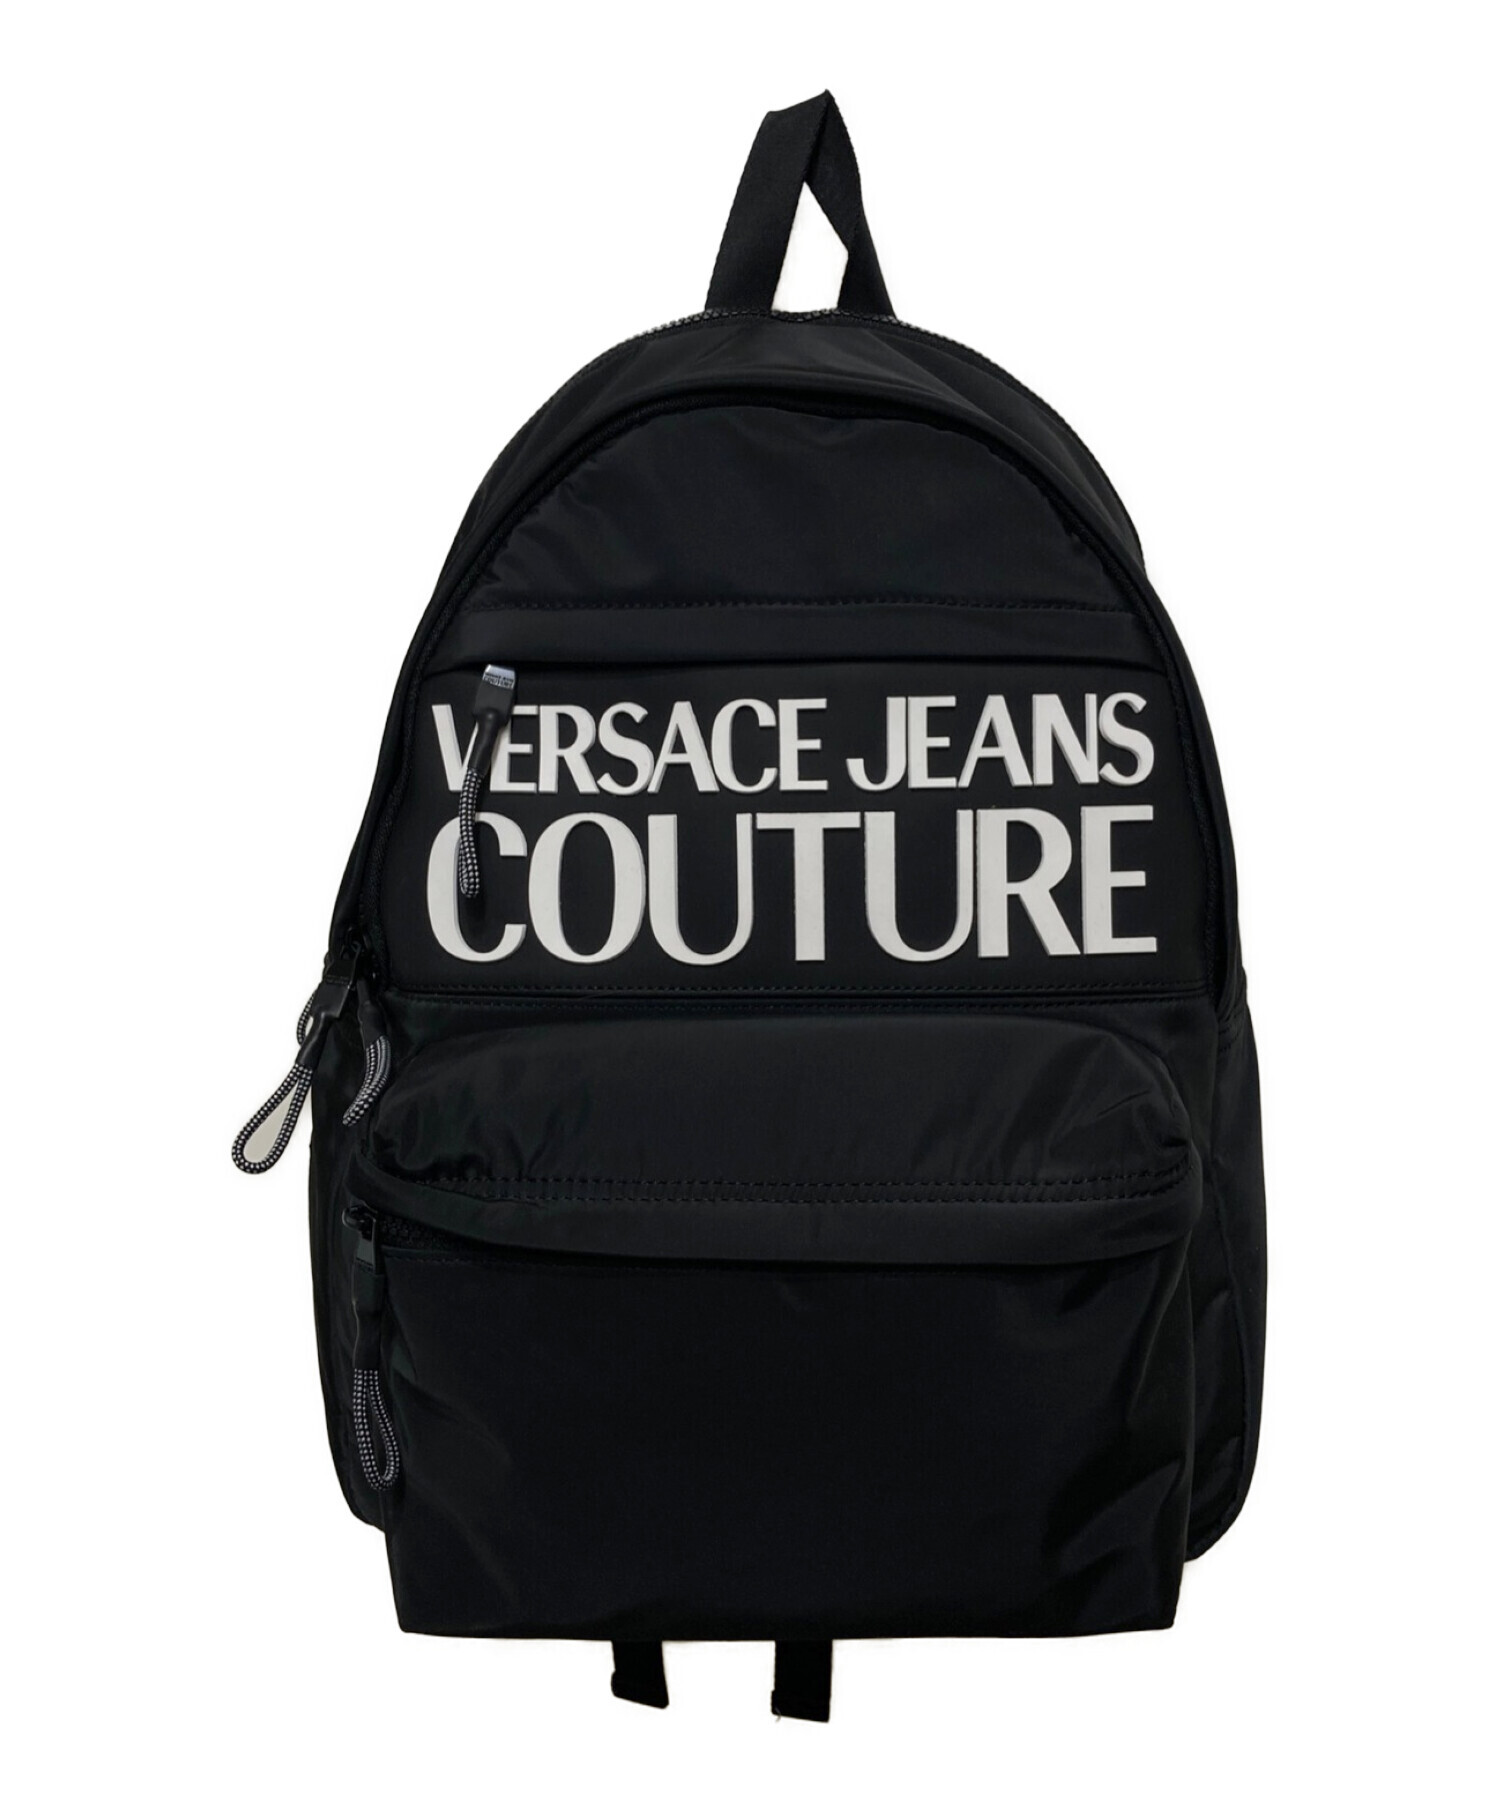 VERSACE JEANS COUTURE リュック ショルダーバッグ ホワイト